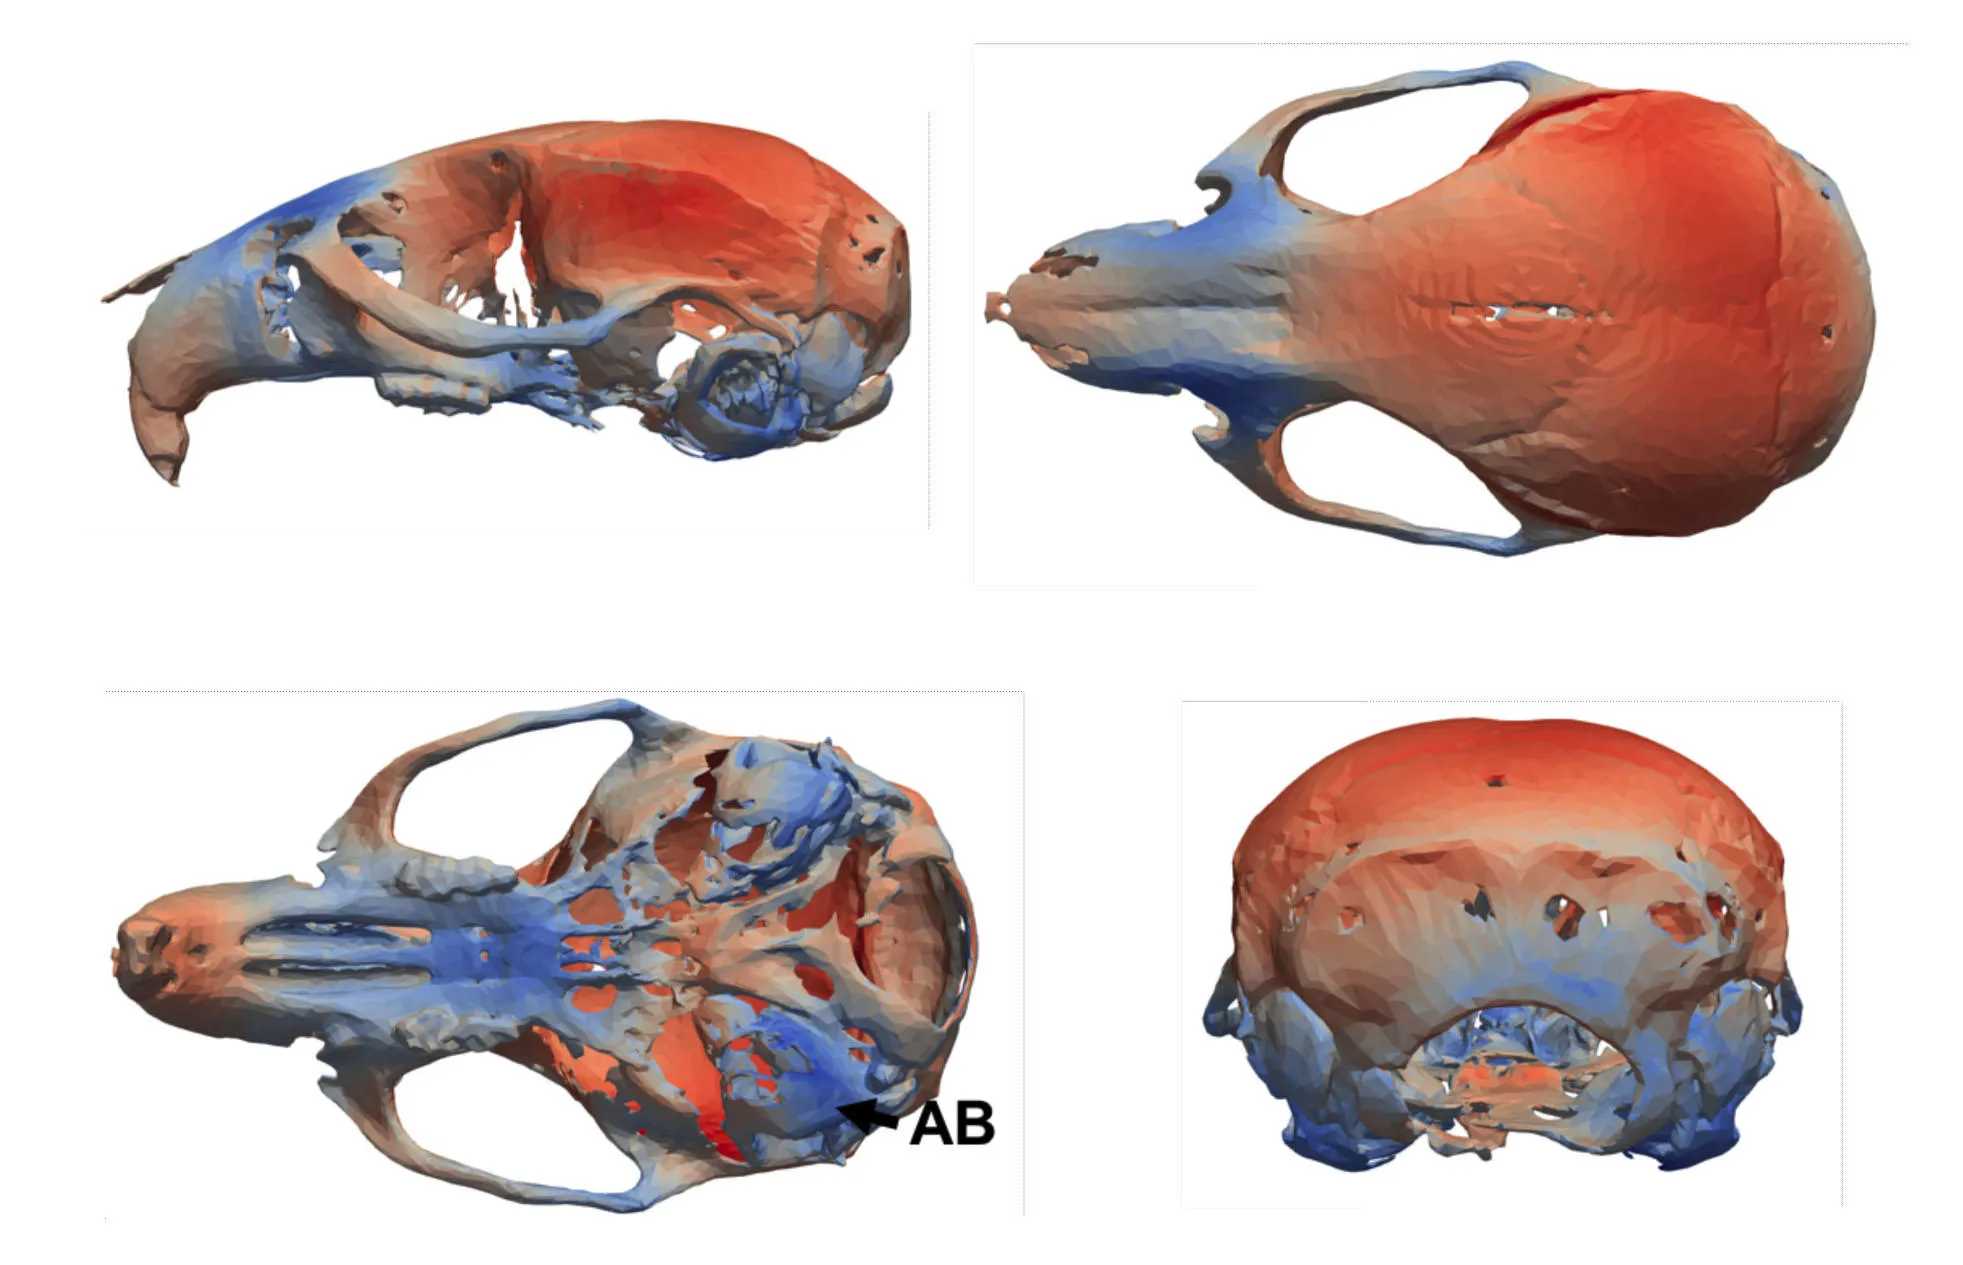 Morphometrics and aetiology of the craniofacial phenotype of a mouse model of Down Syndrome